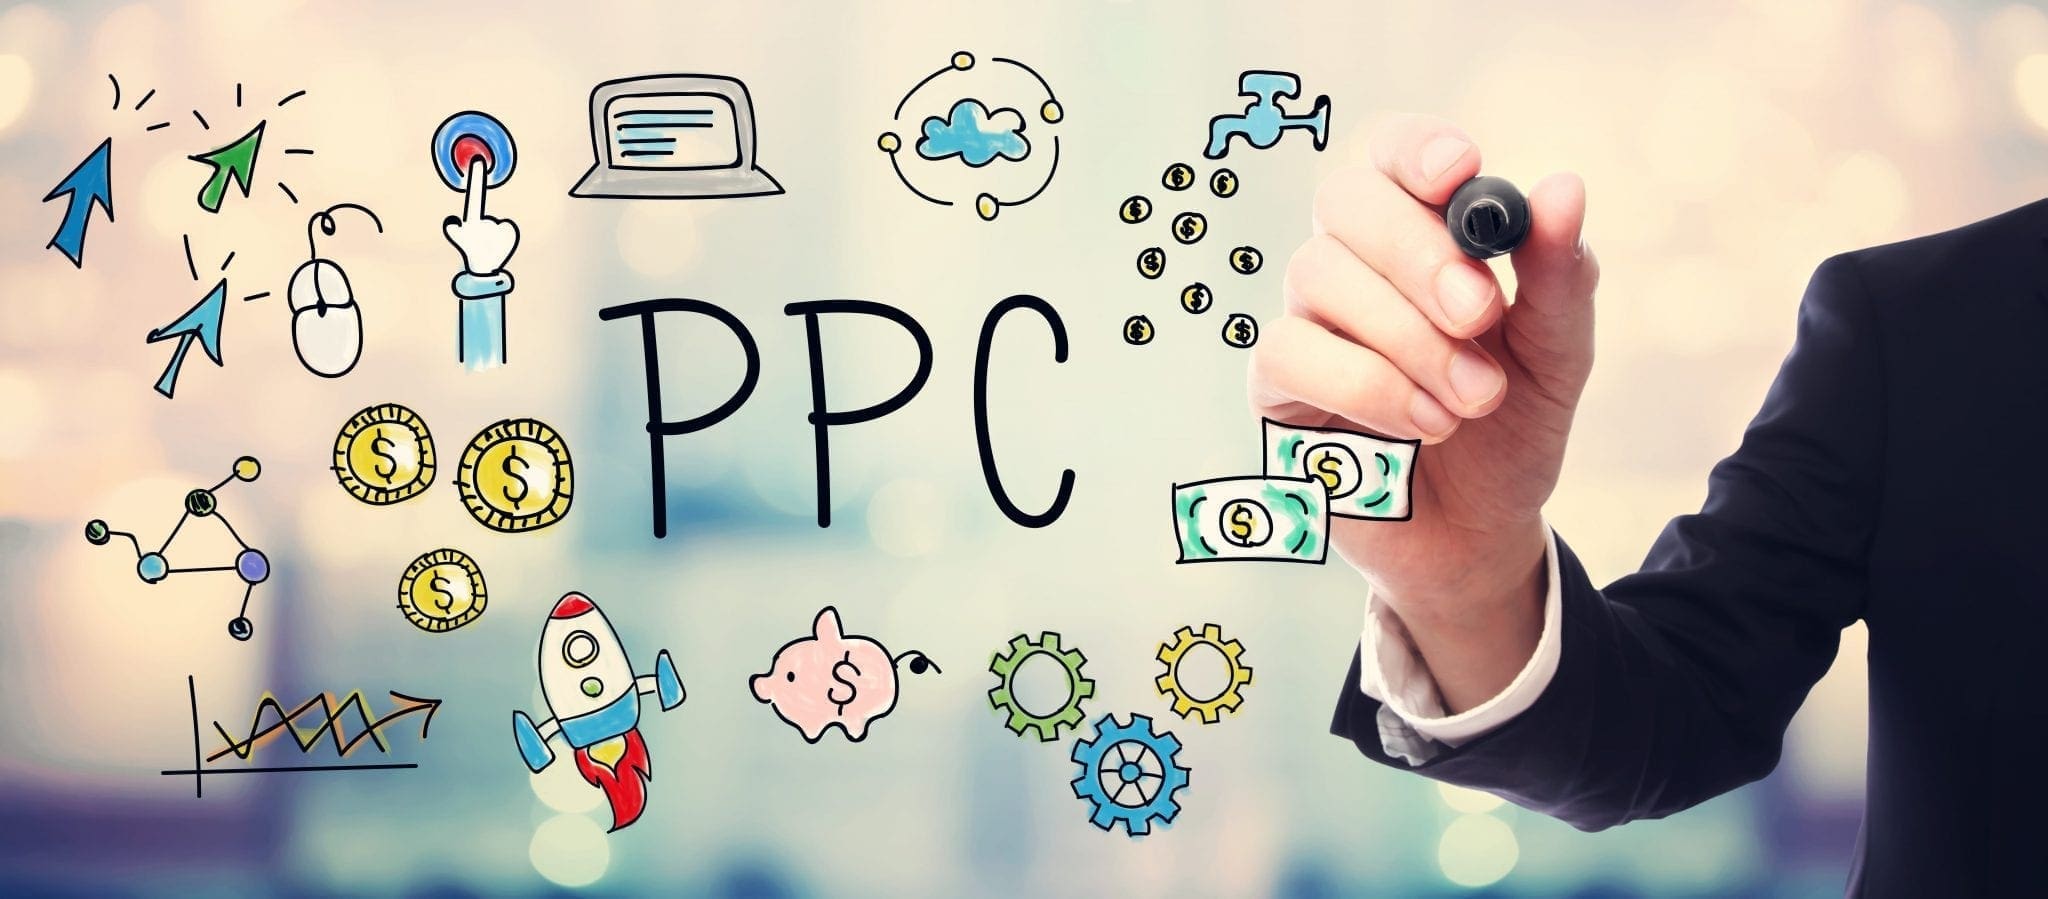 Pay Per Click (PPC) – Great ROI in the Right Hands